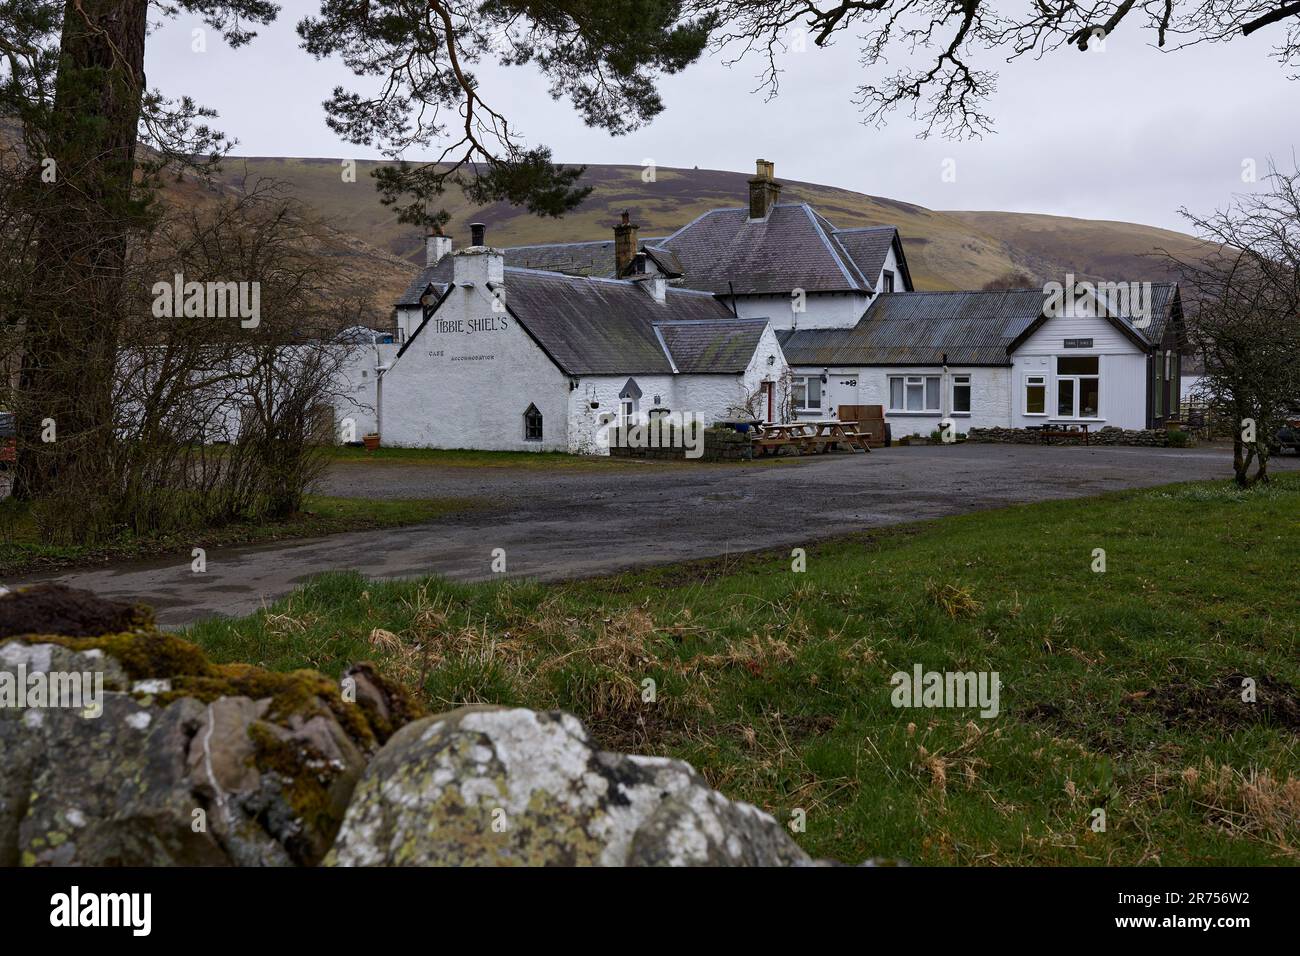 On the Southern Upland way, a welcome rest for ravellers, Tibbie Shiel's Inn by St Mary's Loch. Scotland Stock Photo